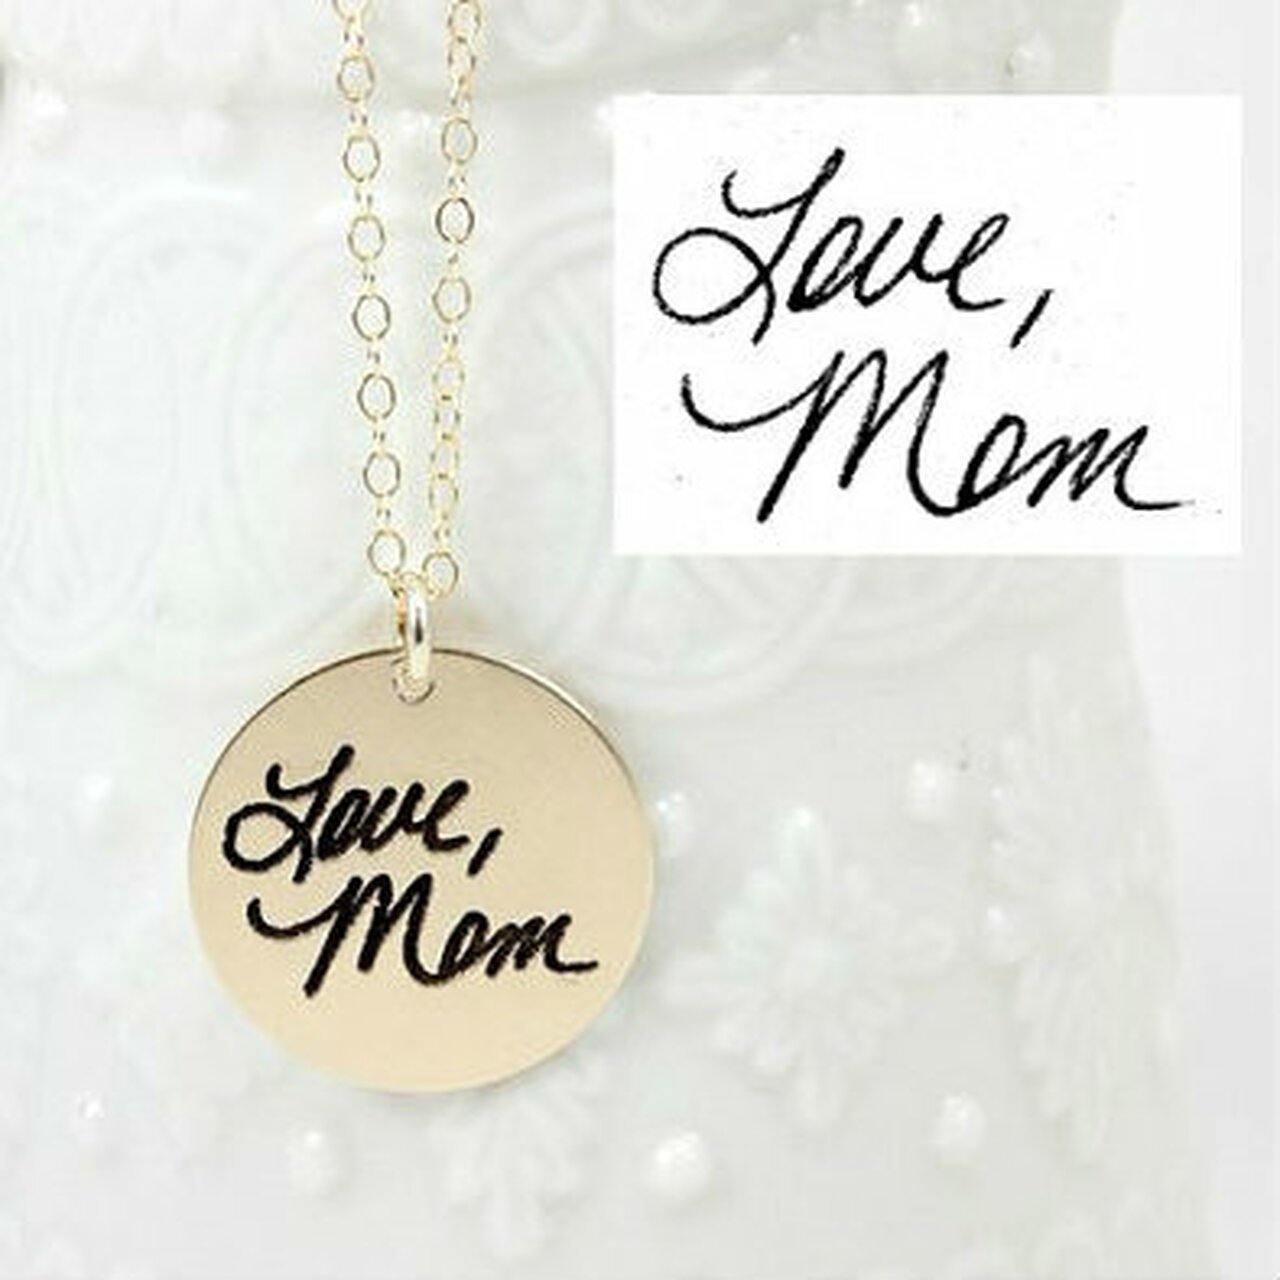 Double Sided Handwriting Necklace - Going Golden